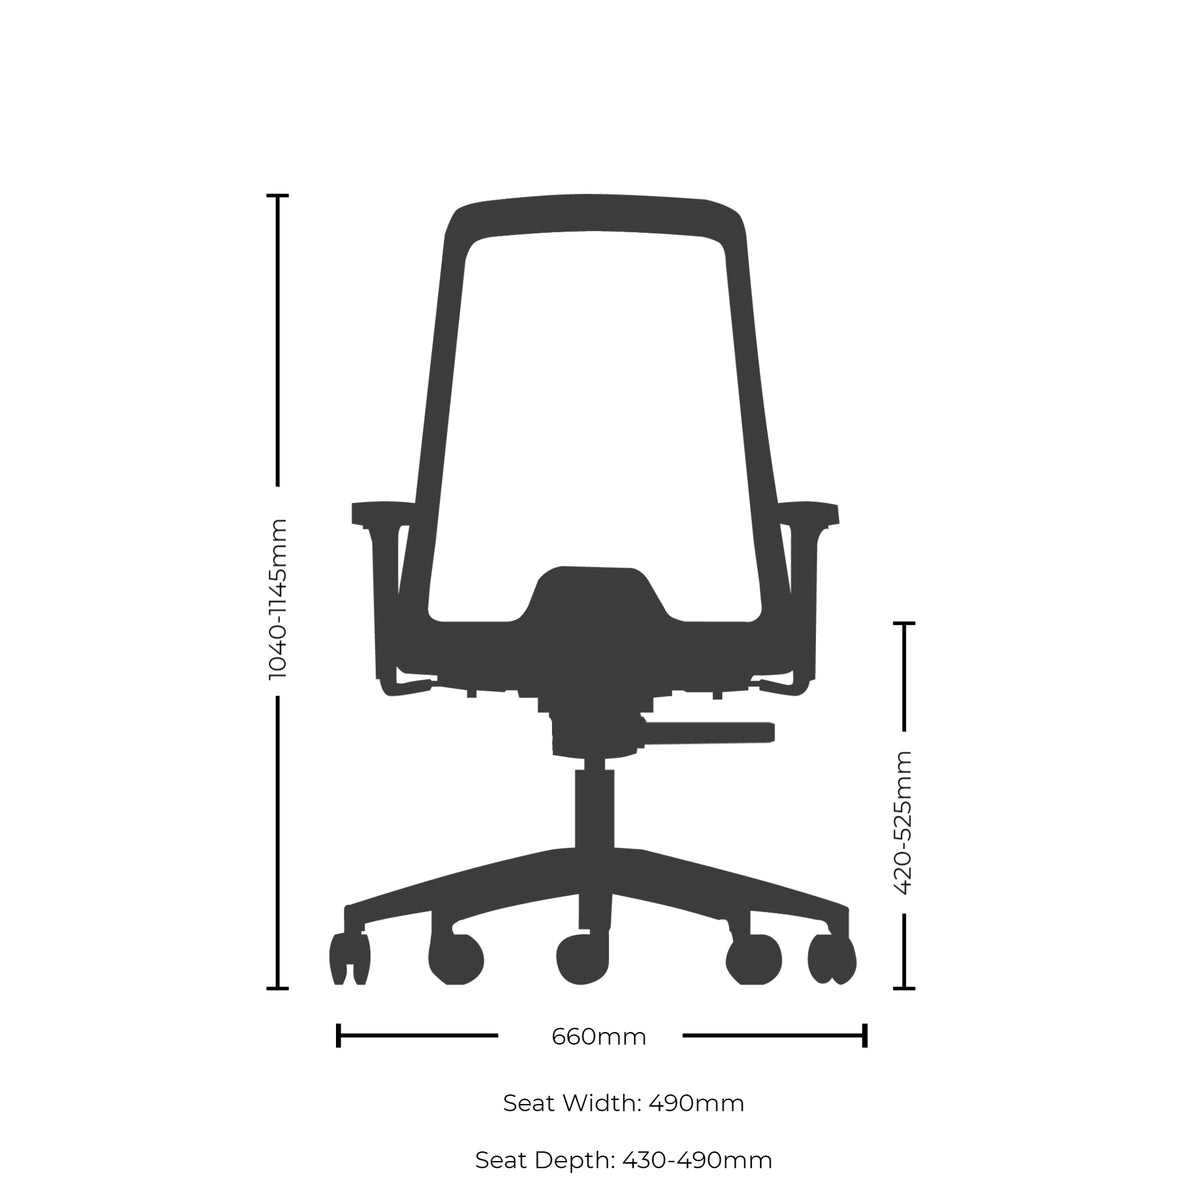 Dimensions for Interstuhl EVERYIS1 Office Task Chair 172E